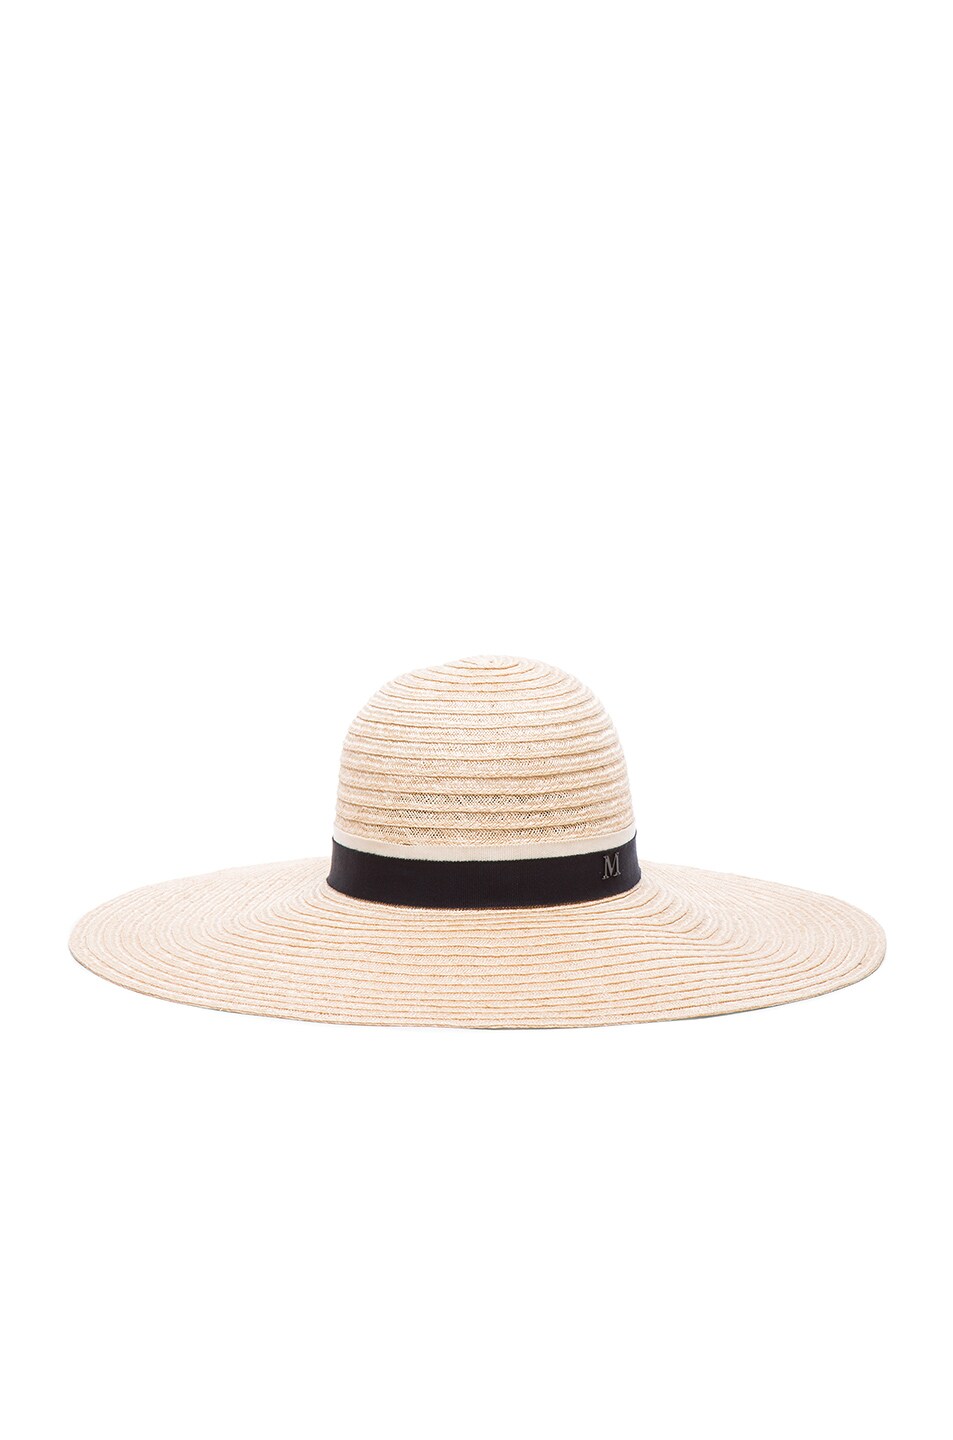 Image 1 of Maison Michel Blanche Capeline Straw Hat in Beige, Natural & Navy